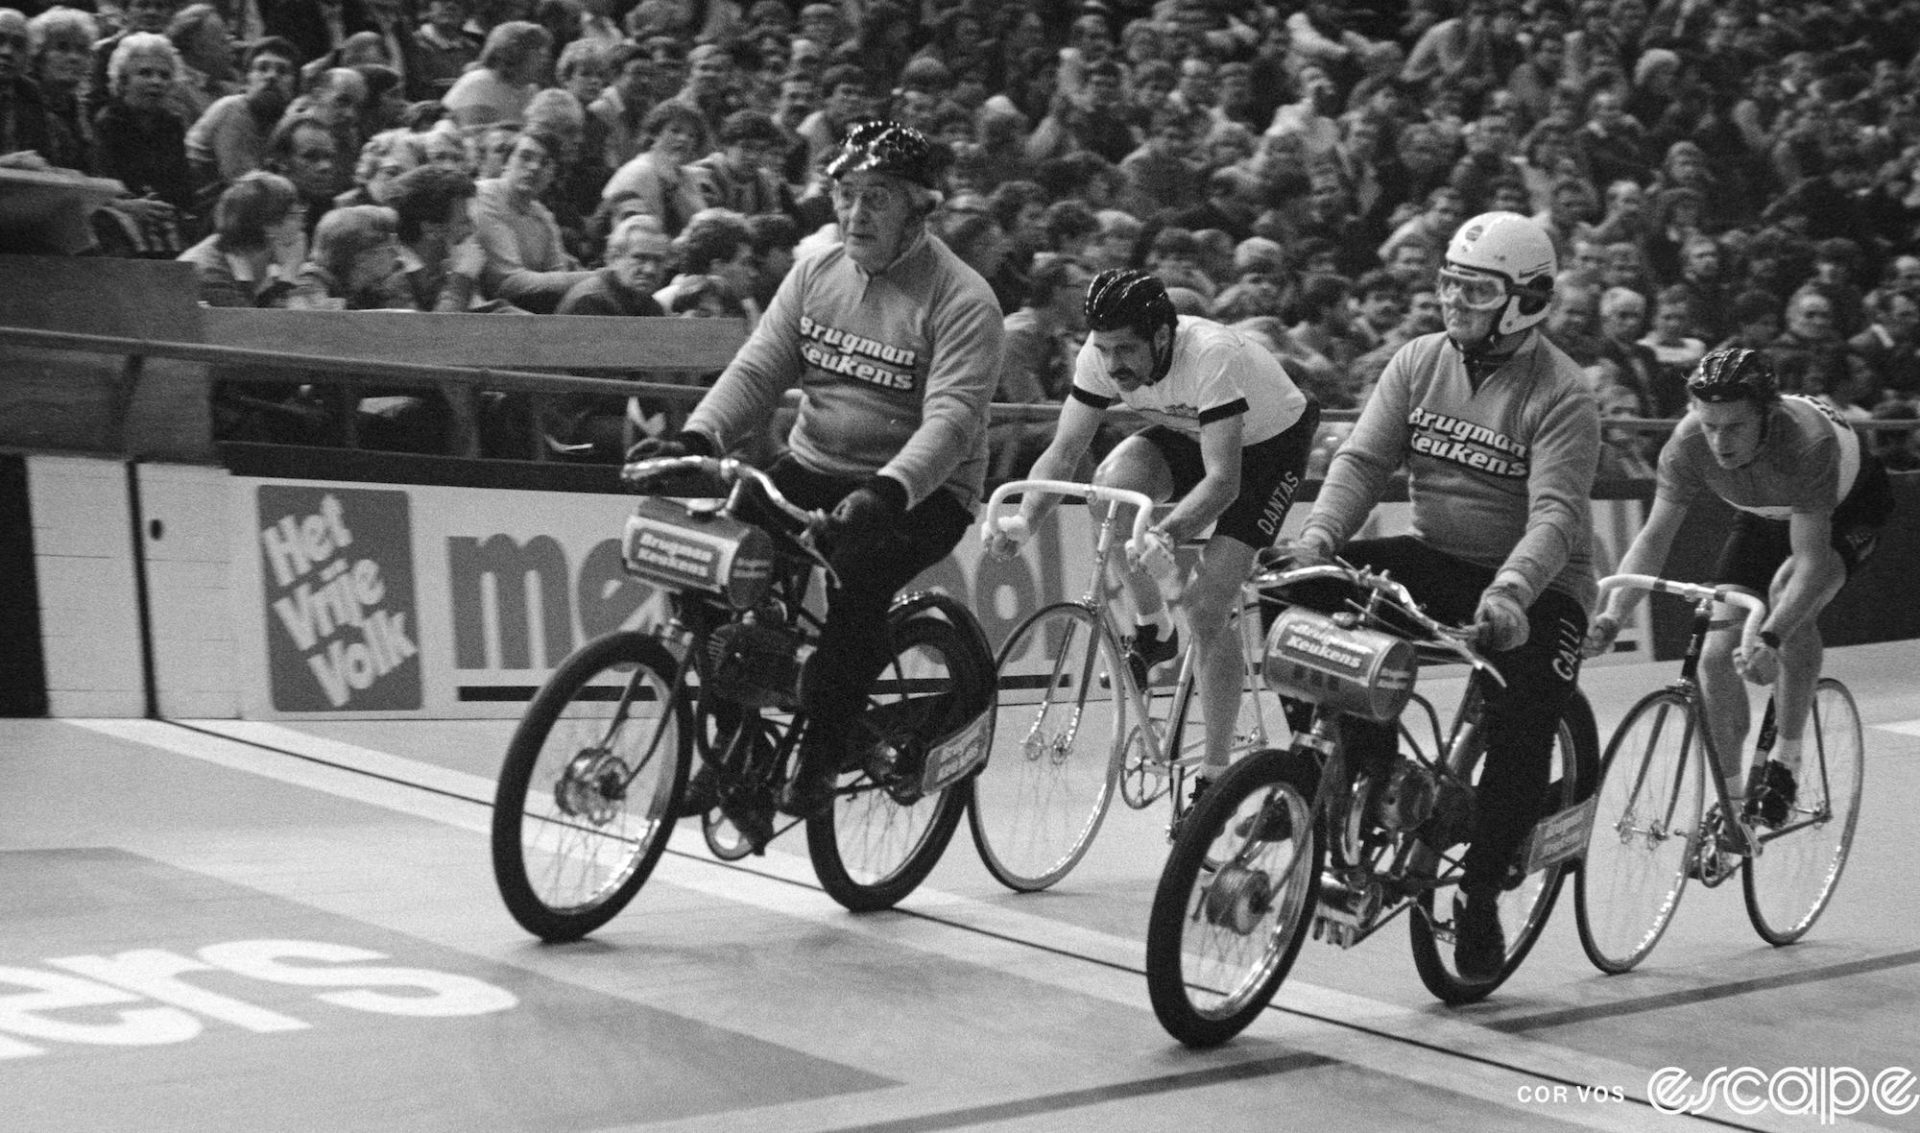 An old photo of Danny Clark and another racer in a similar derny-paced event from 50 years ago. The dernies look almsot identical to modern ones.